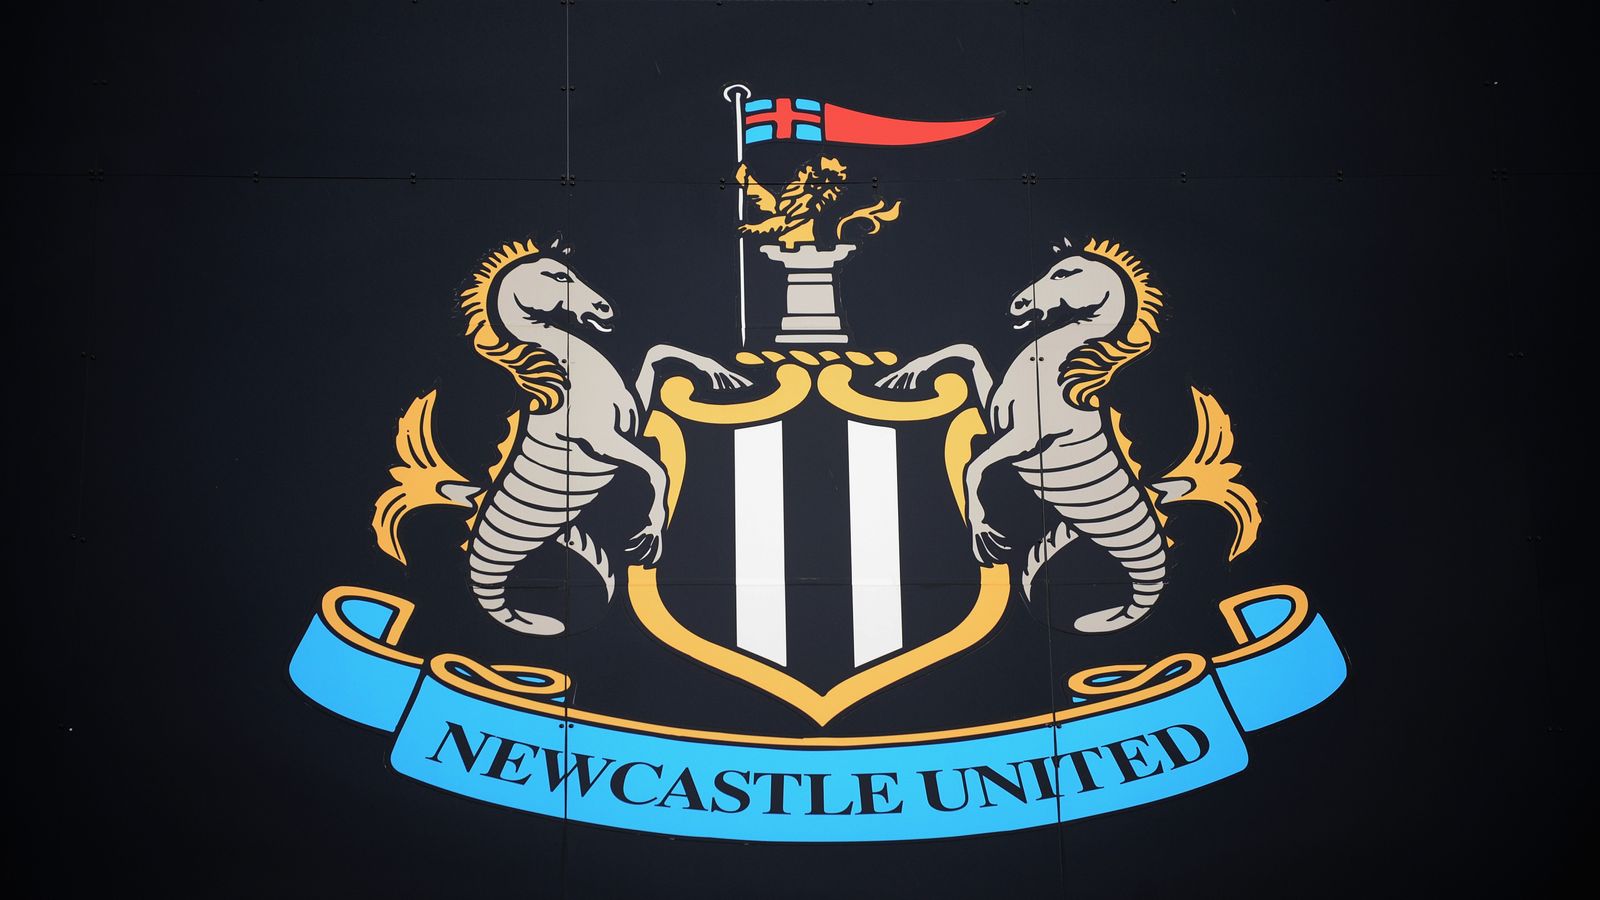 Newcastle United ready to assist authorities after abuse claims